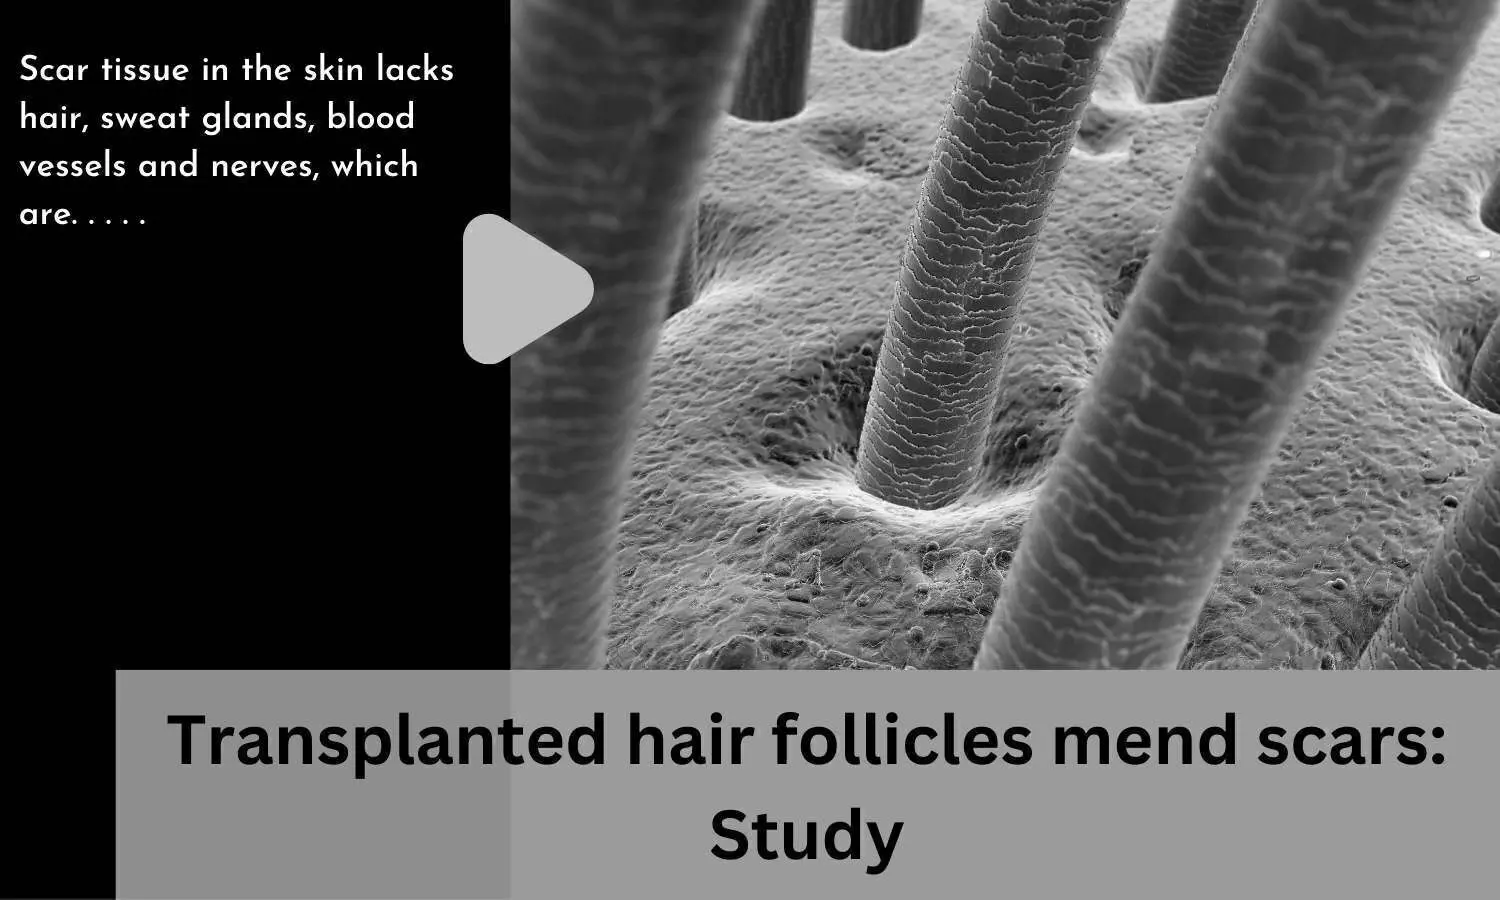 Transplanted hair follicles mend scars: Study